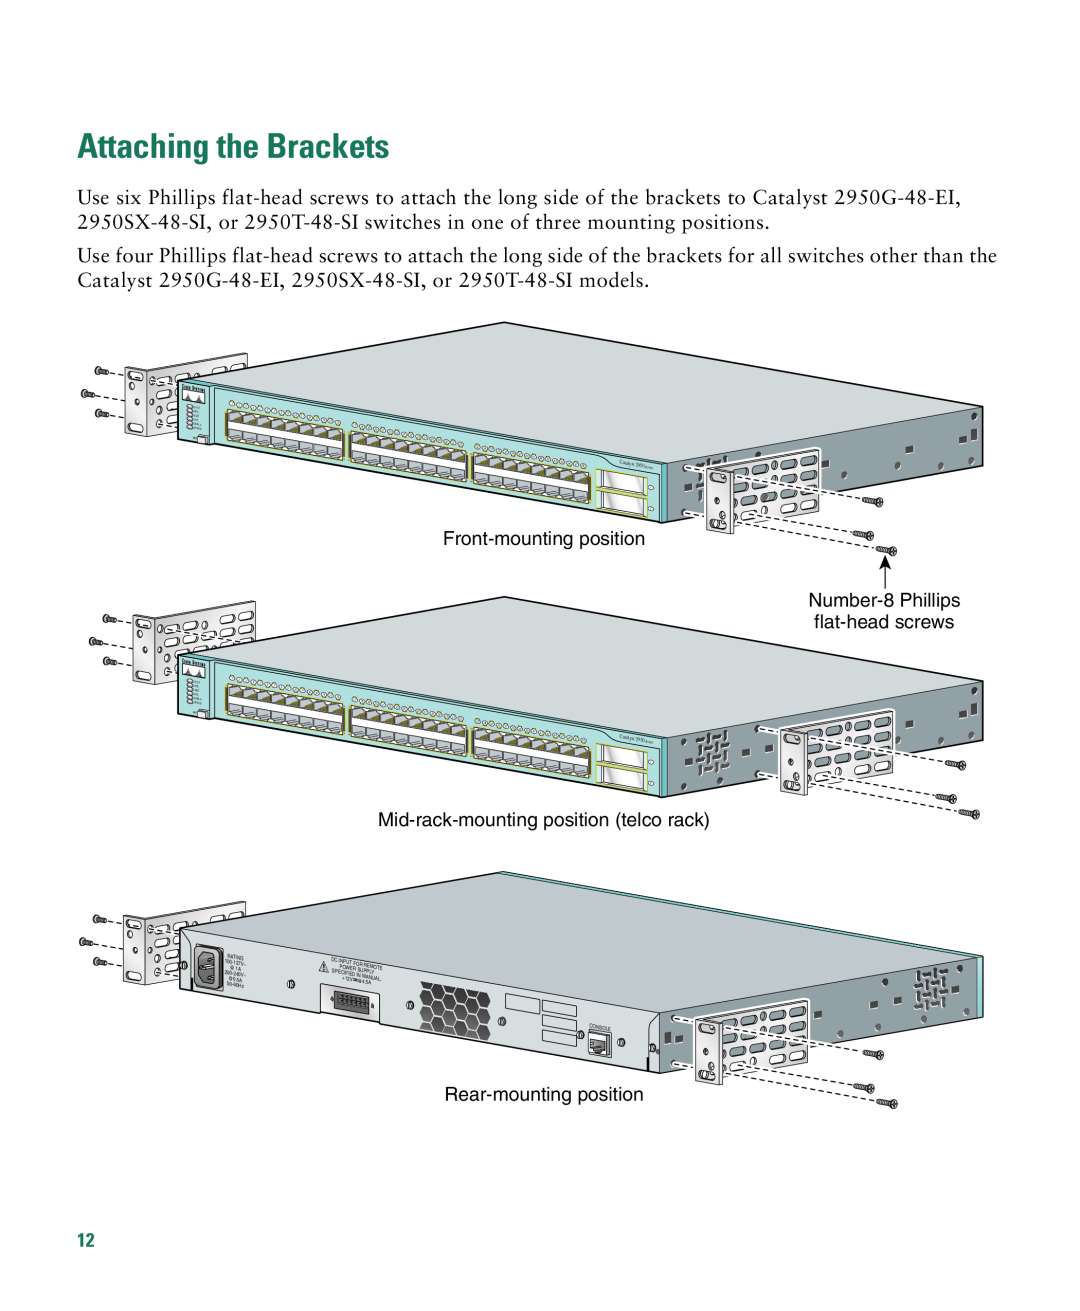 Cisco Systems CATALYST 2950 manual Attaching the Brackets, Front-mounting position, Mid-rack-mounting position telco rack 